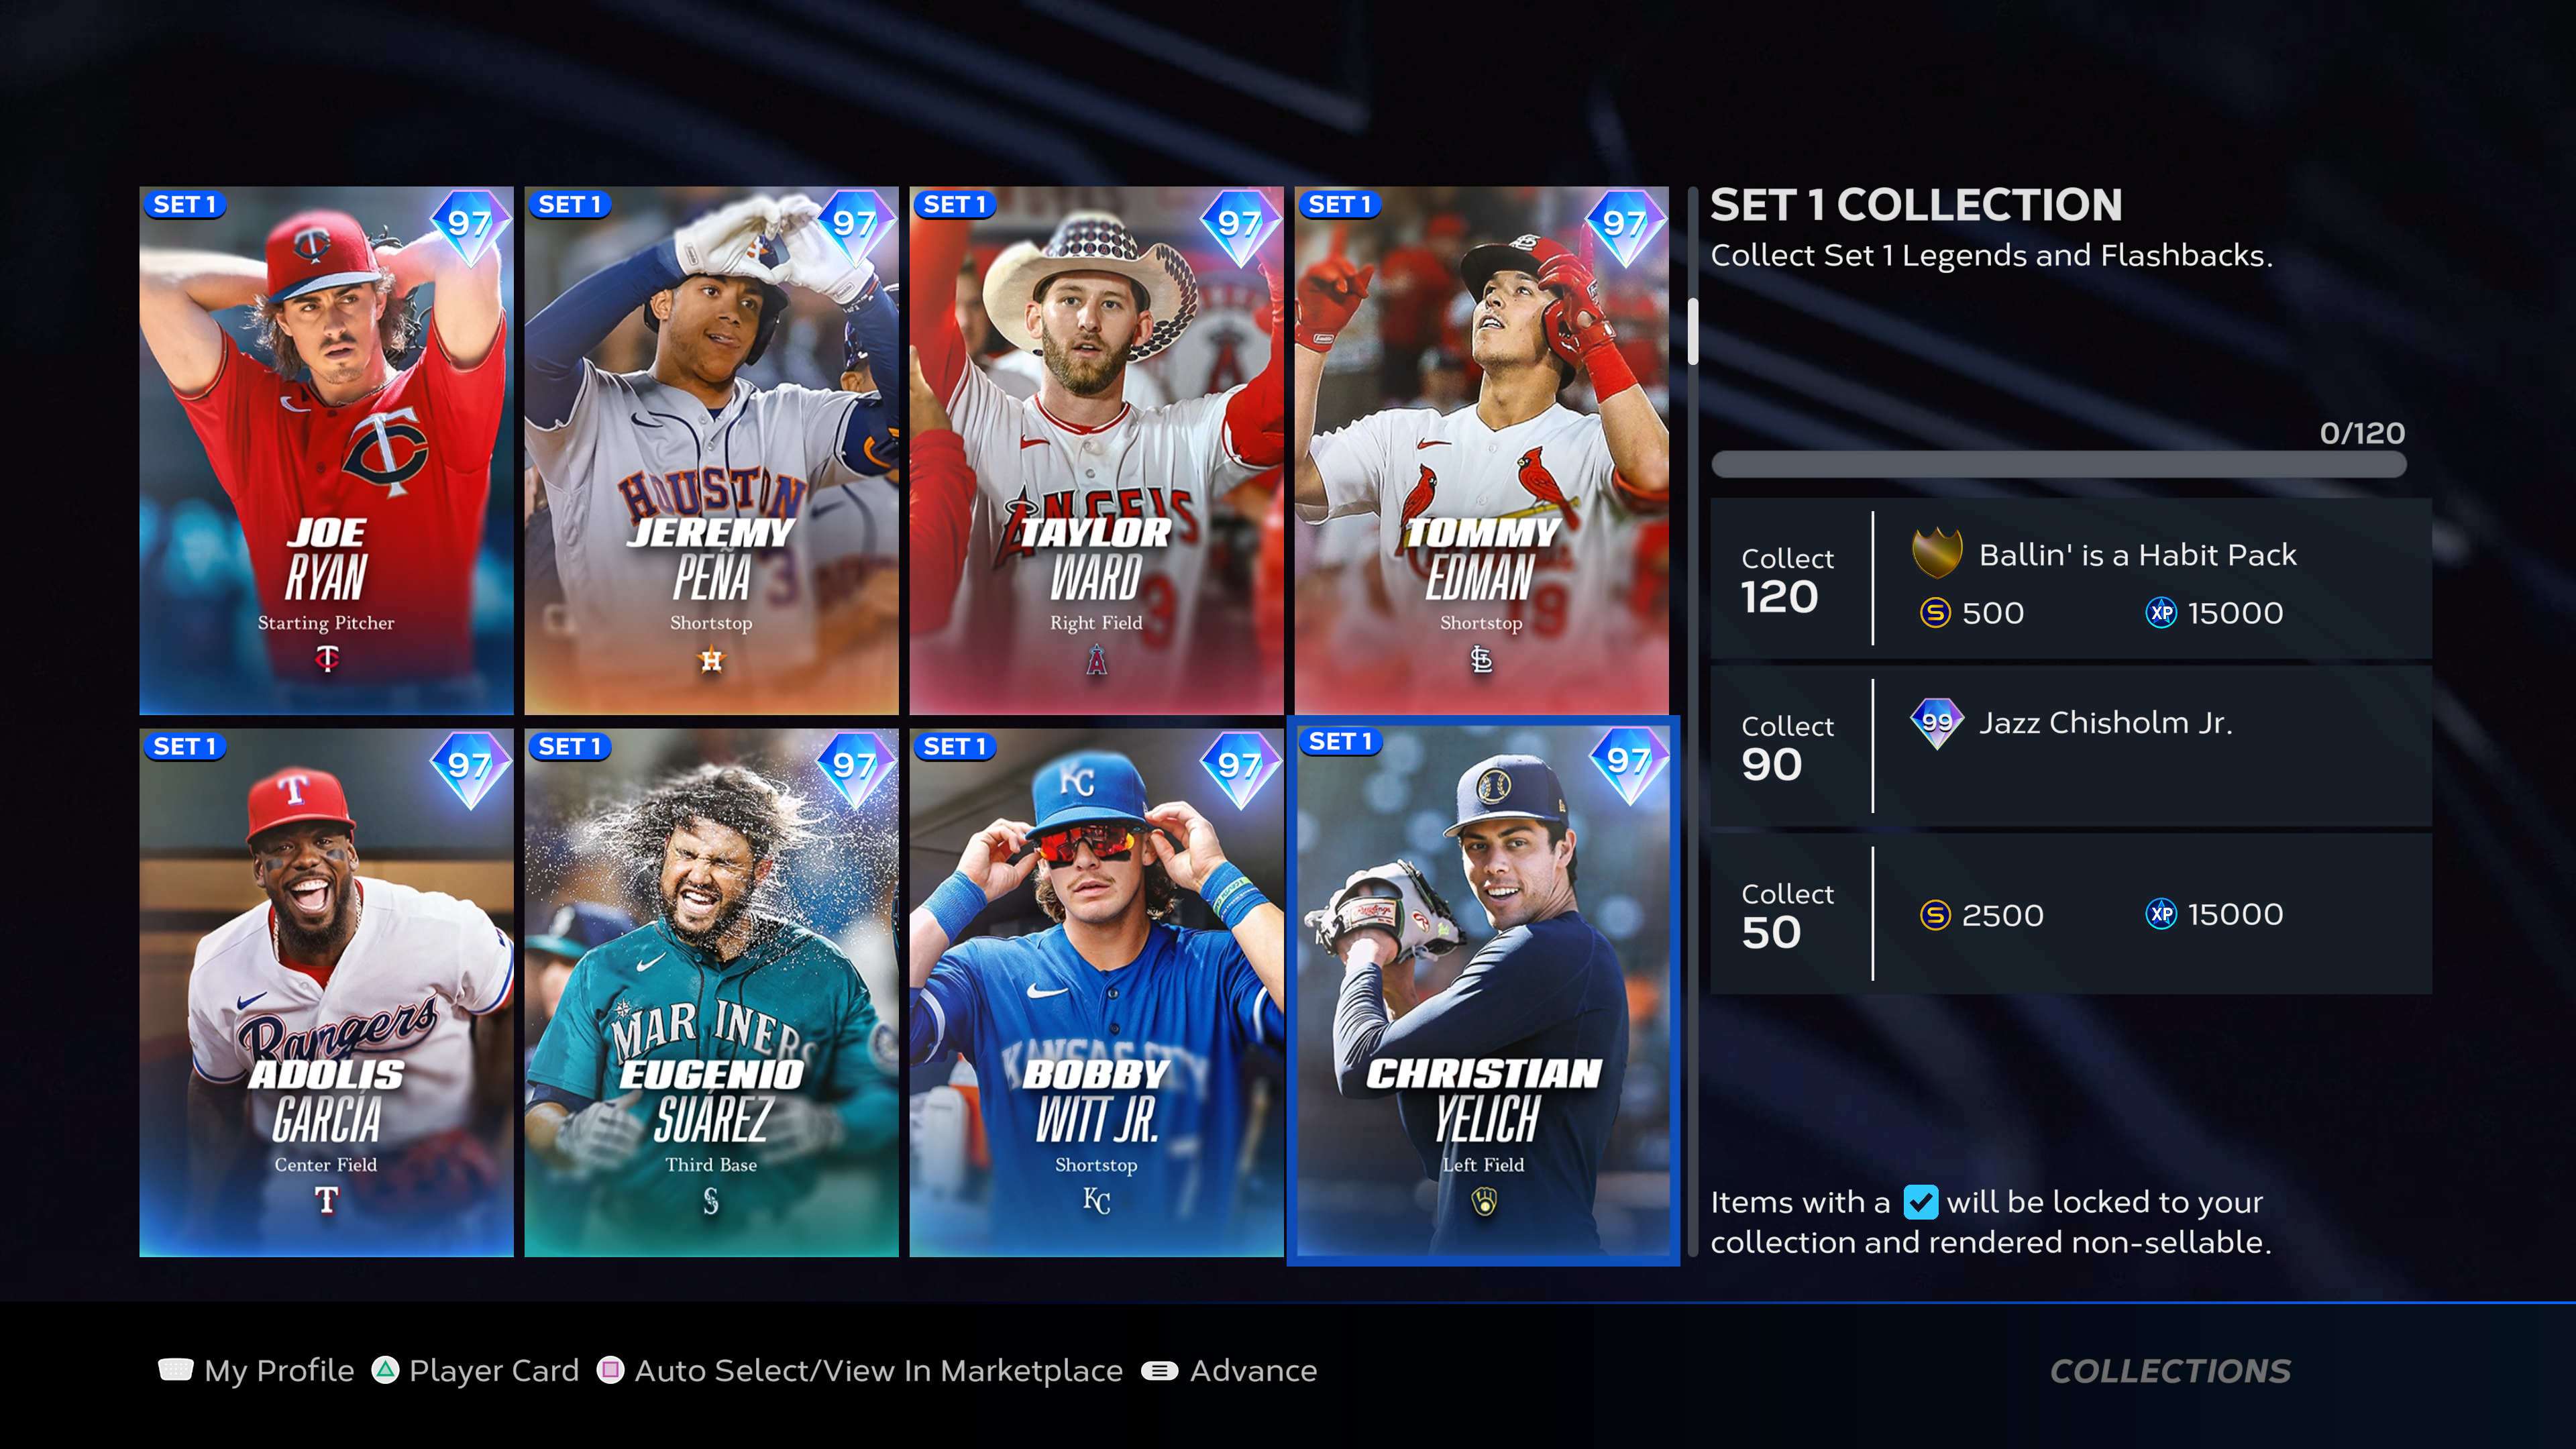 Diamond dynasty ways to play collections